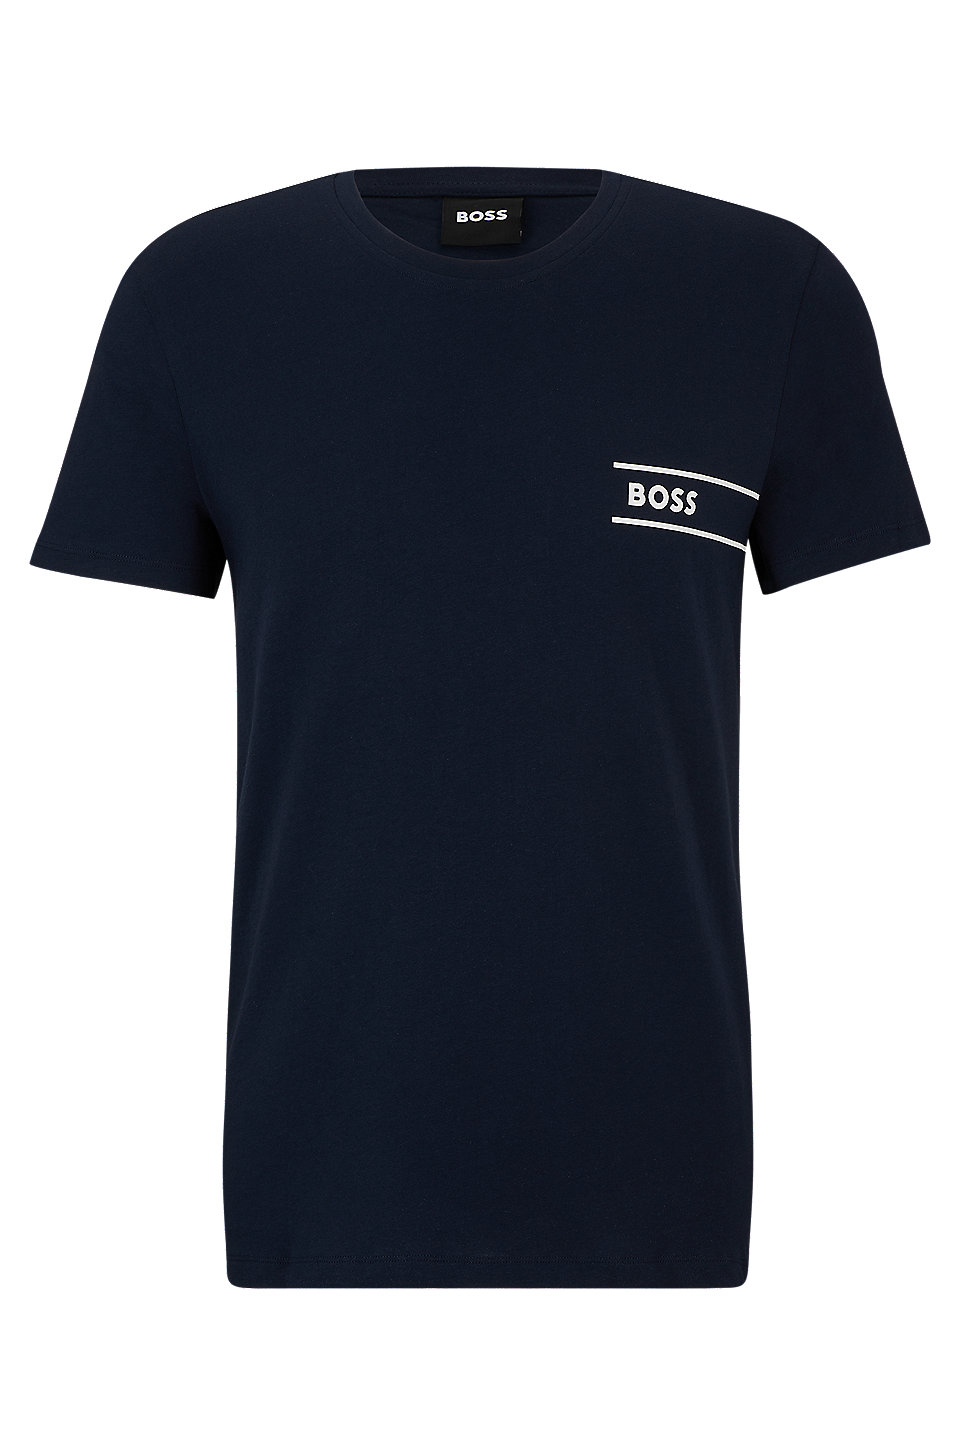 BOSS - Cotton-jersey underwear T-shirt with logo and stripes